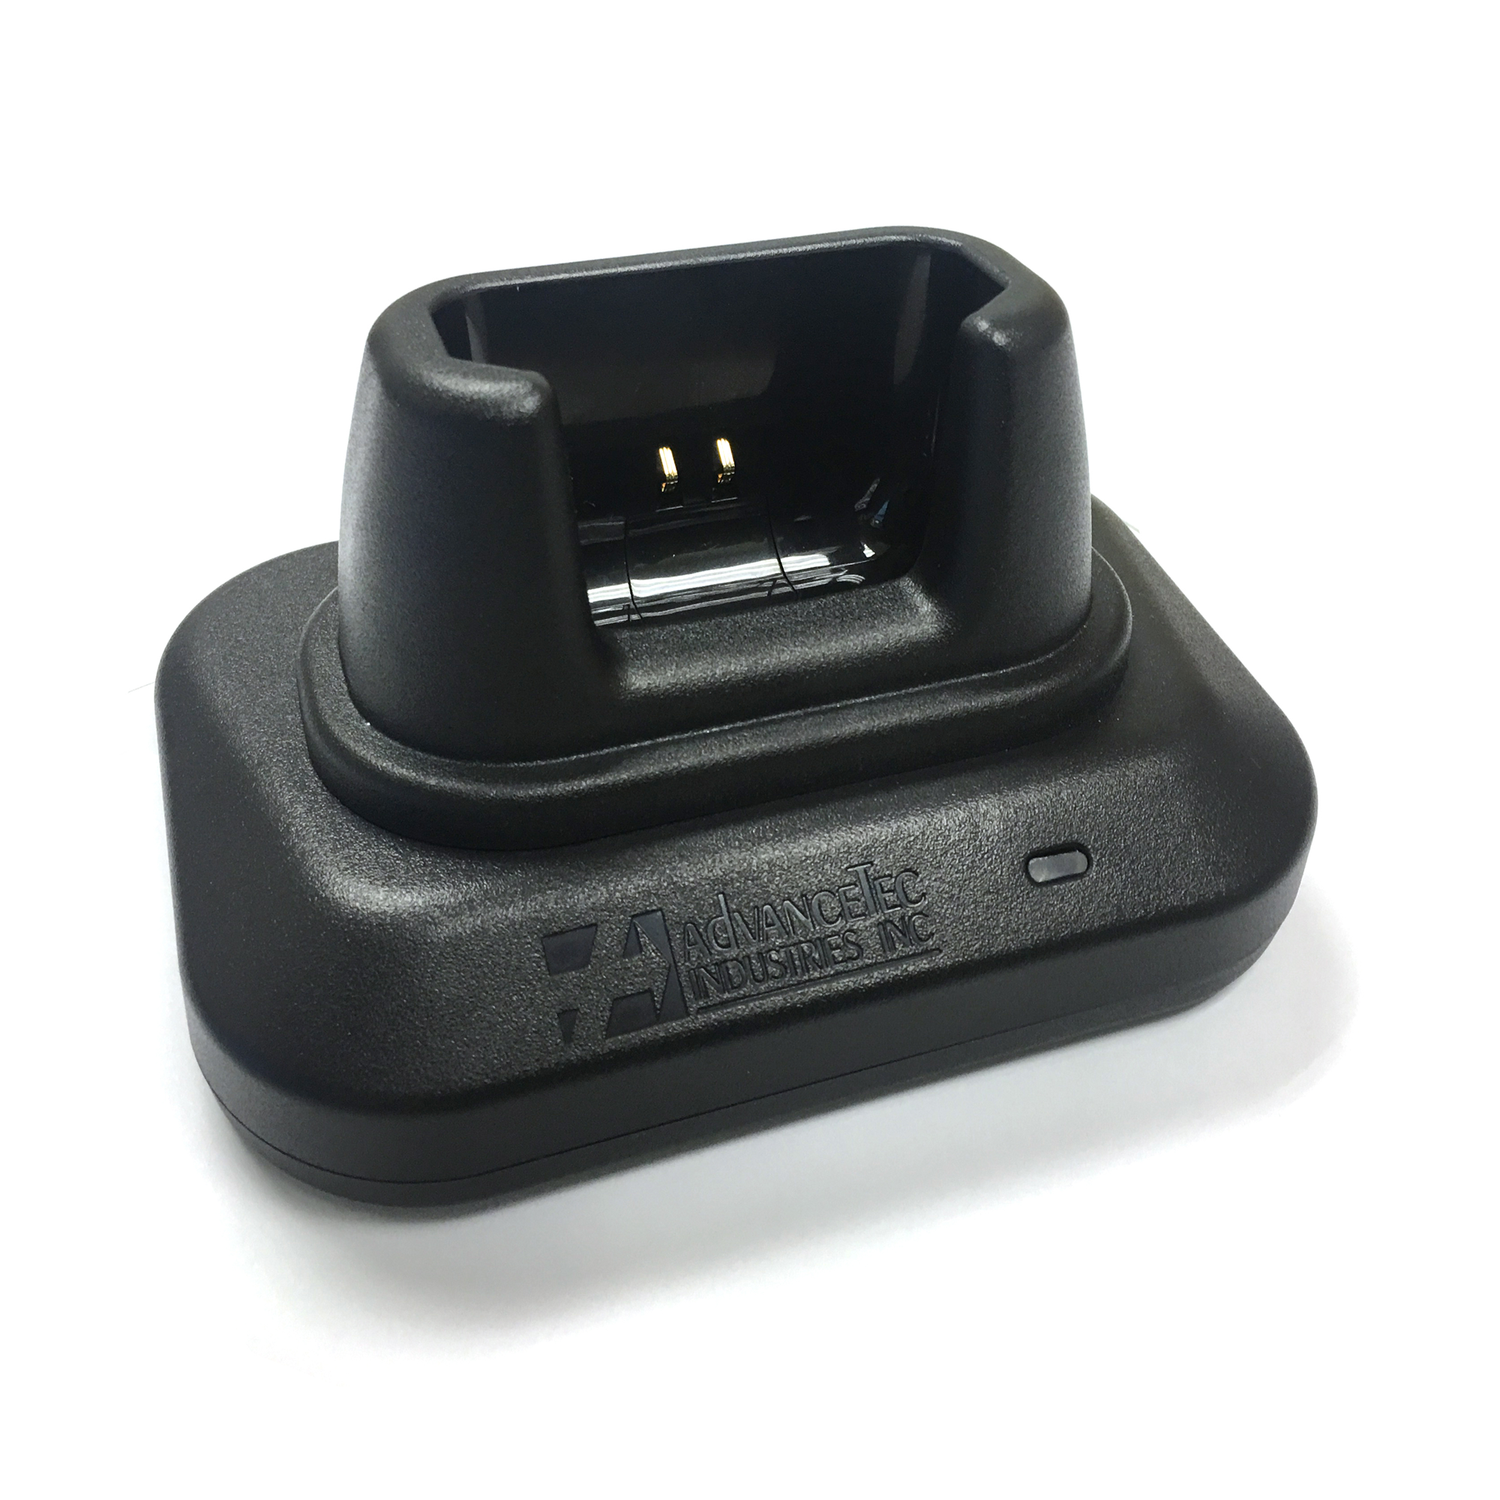 AdvanceTec Drop in Charger for XP5s